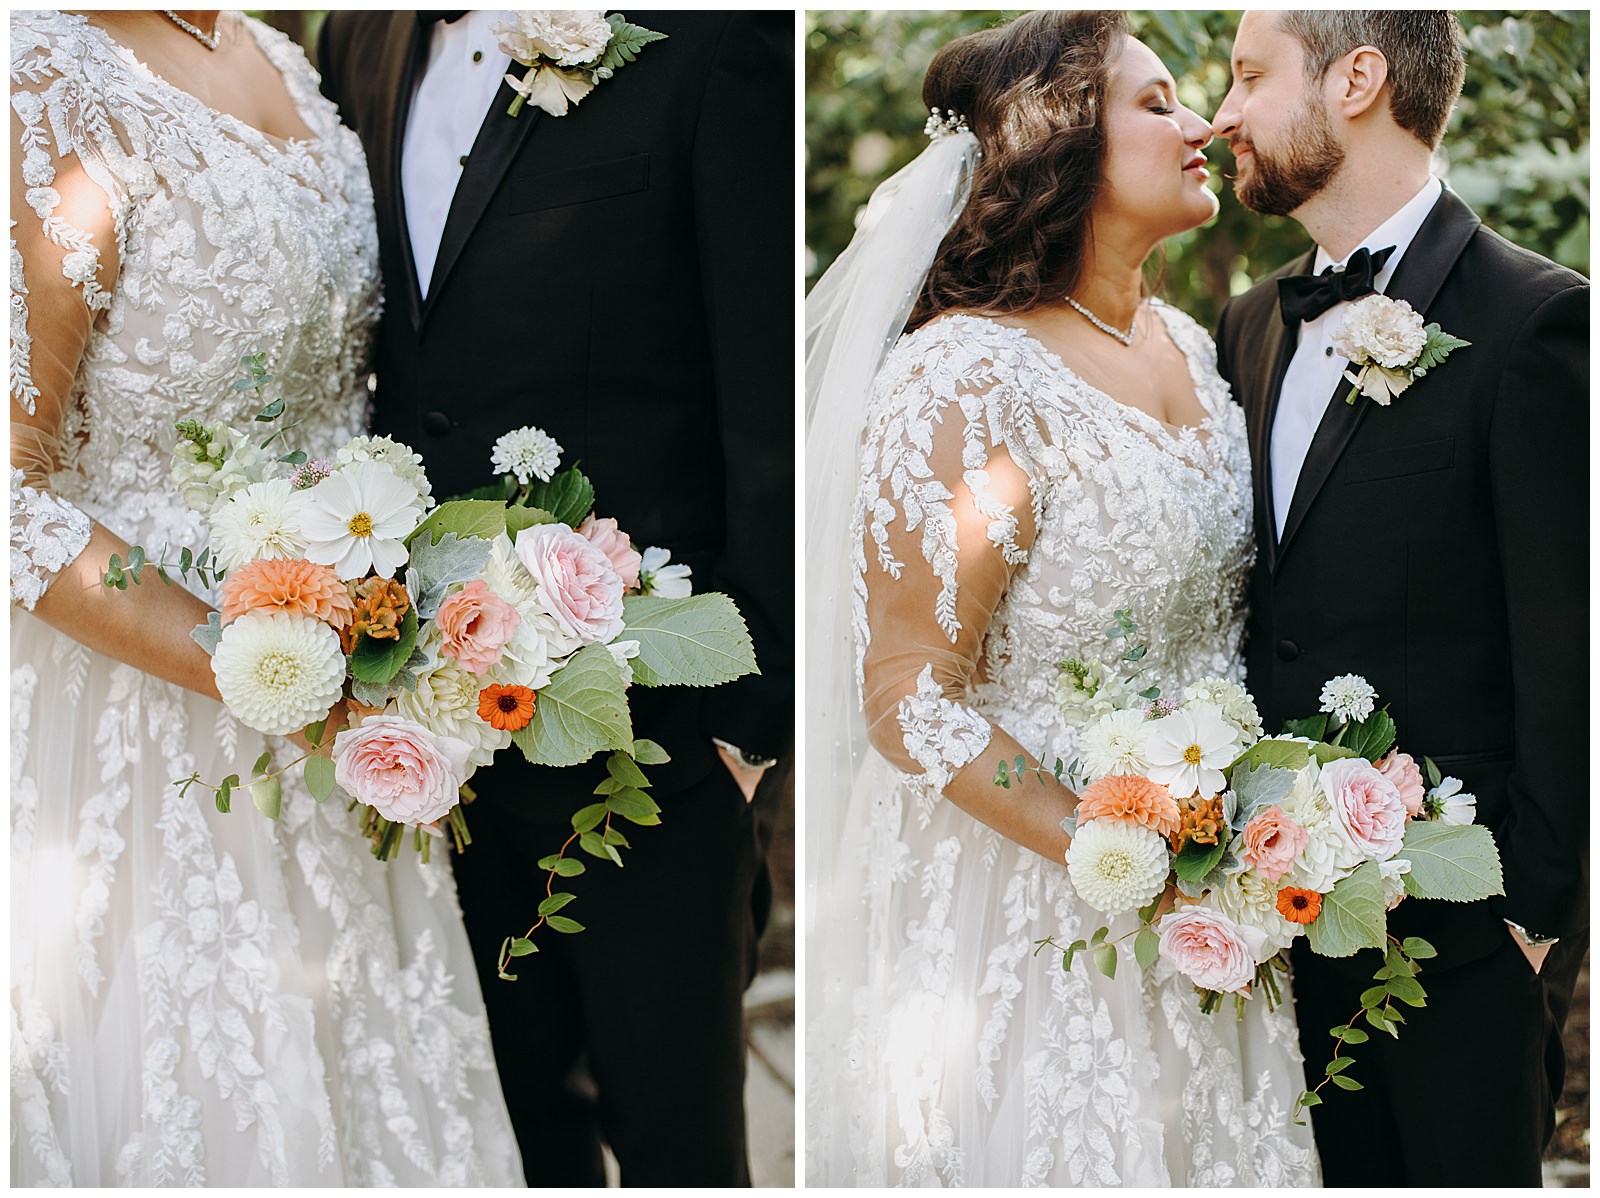 Dupont Circle Hotel Wedding black tie and florals